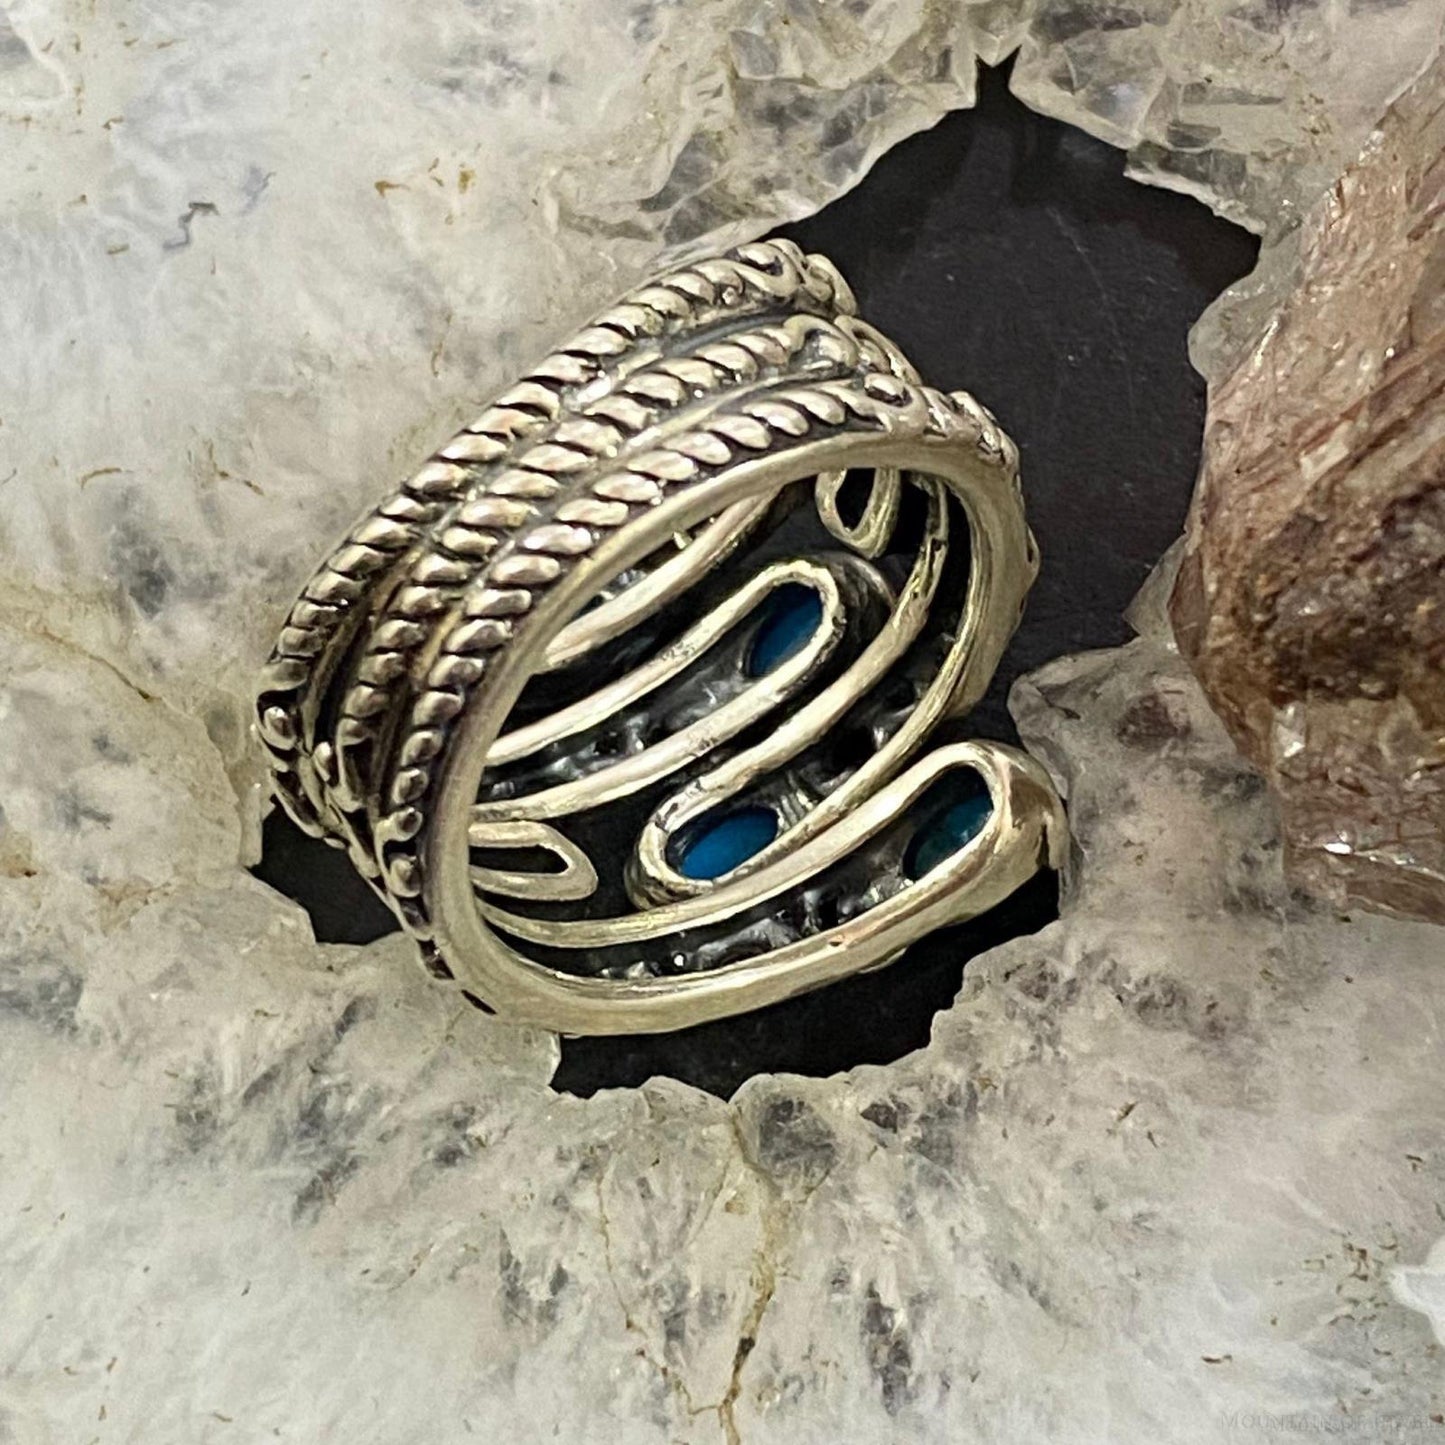 Carolyn Pollack Sterling Silver 4 Sleeping Beauty Turquoise Decorated Ring For Women